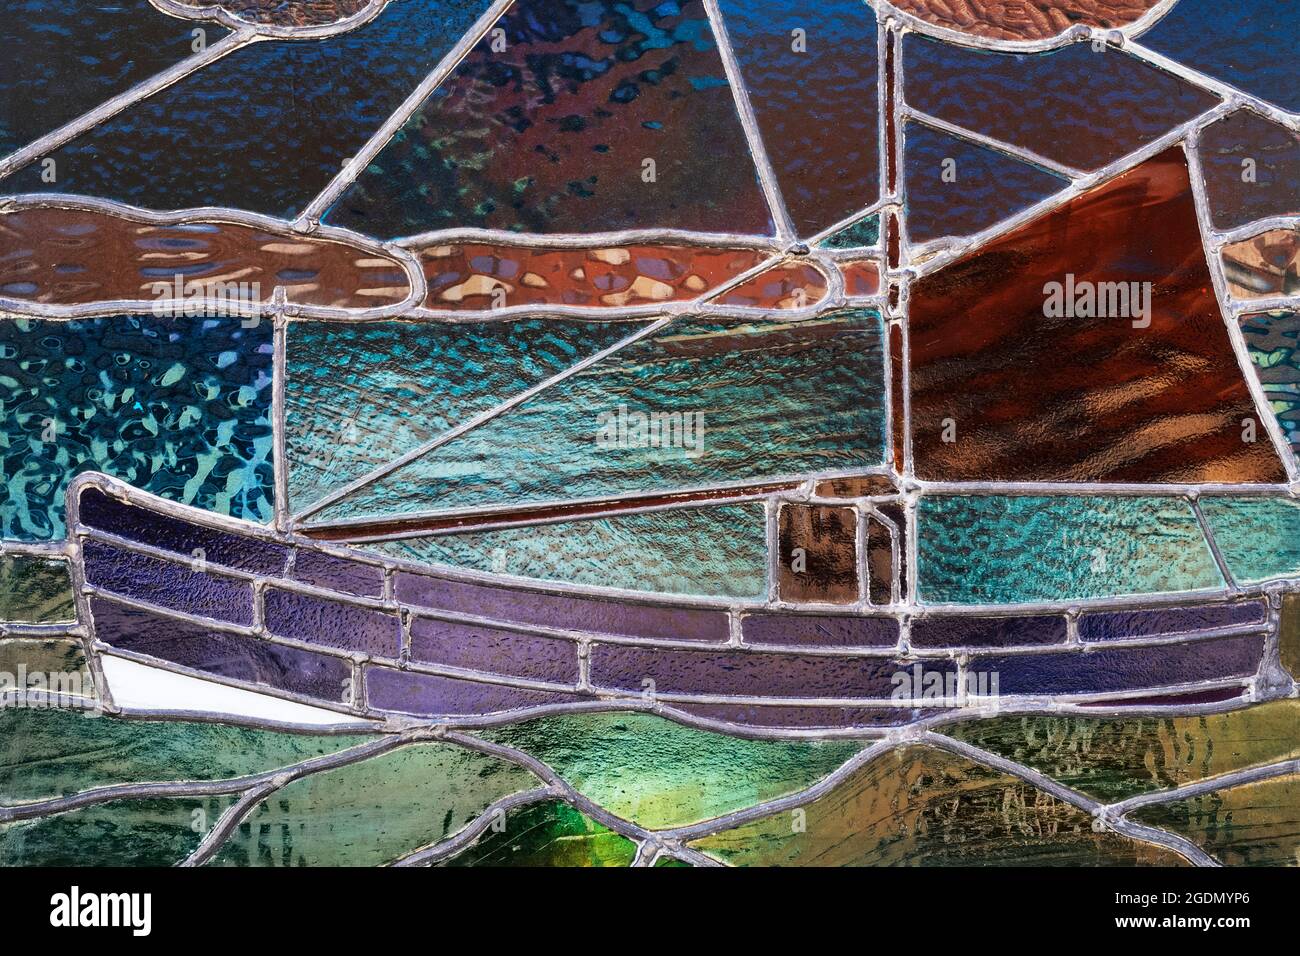 A traditional fishing Coble depicted in stained glass, Queen Street, Filey, North Yorkshire, UK Stock Photo